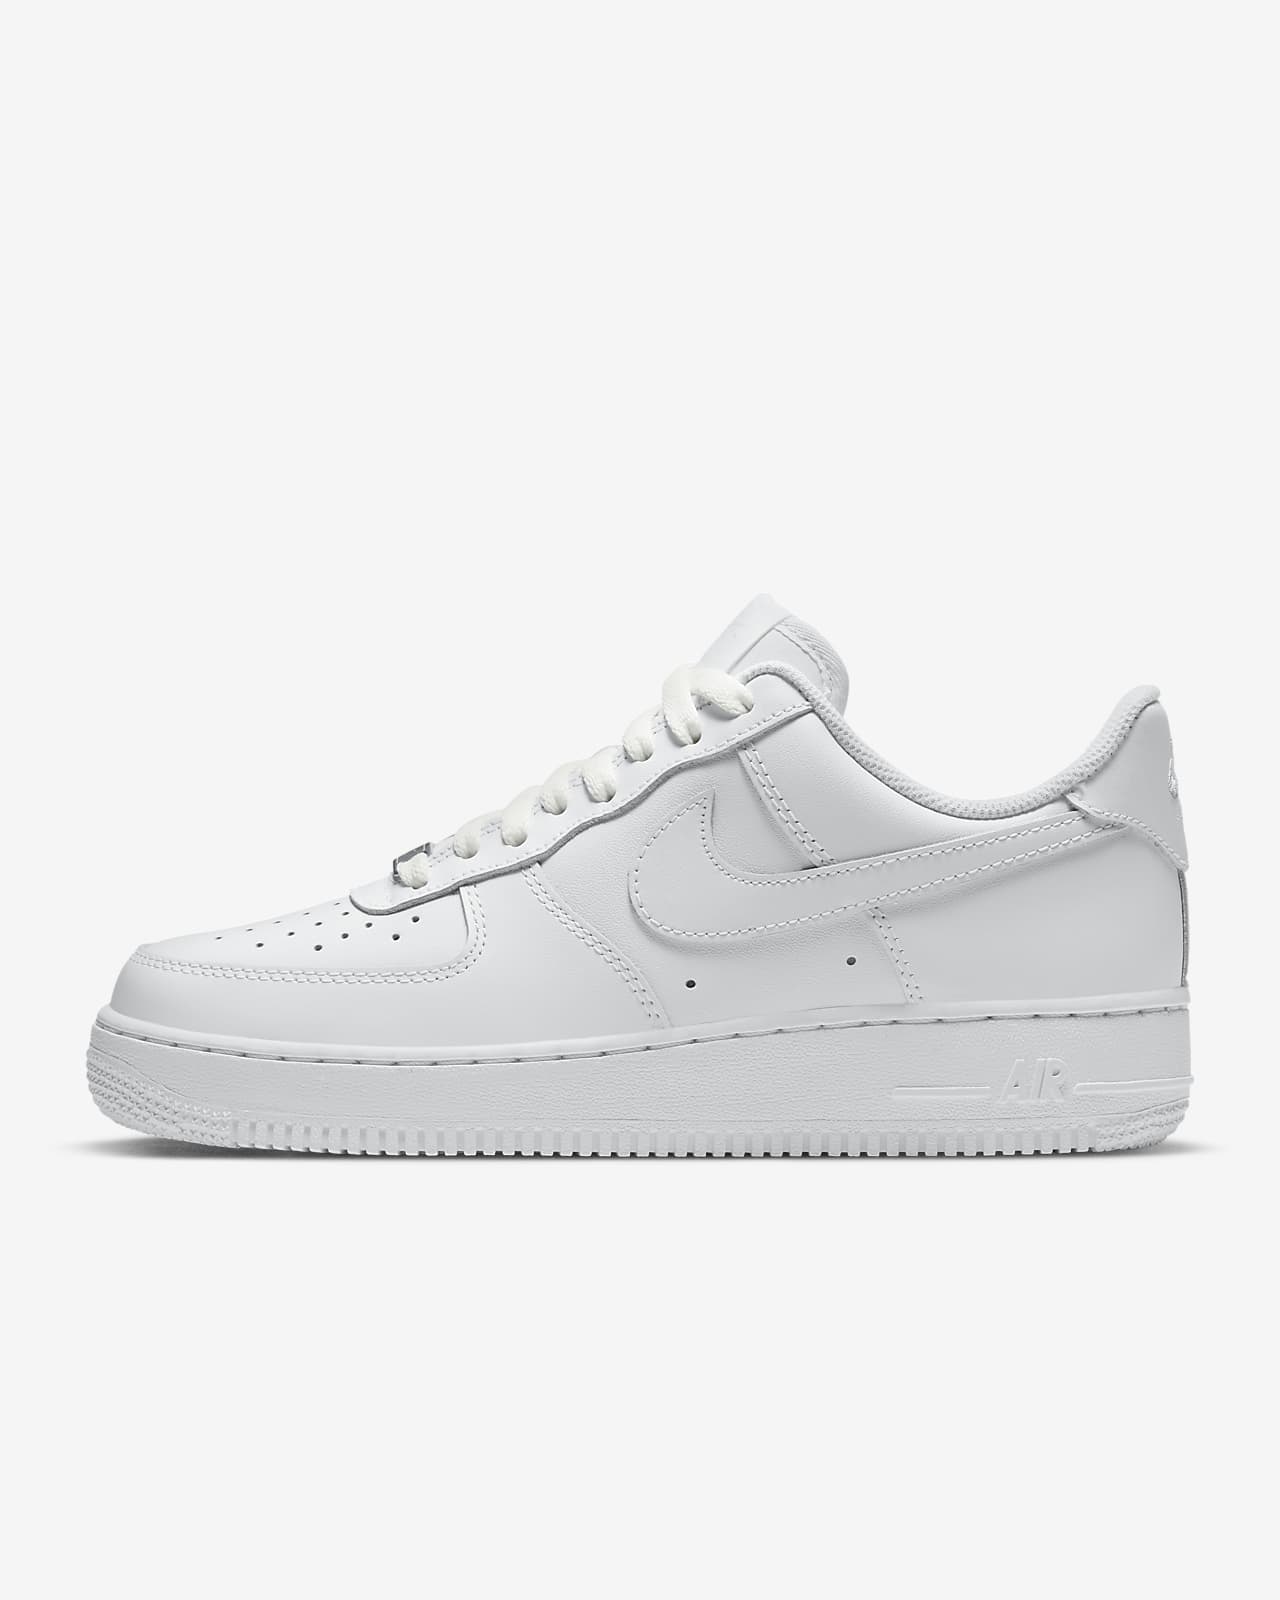 Chaussure Nike Air Force 1 '07 pour Femme. Nike BE